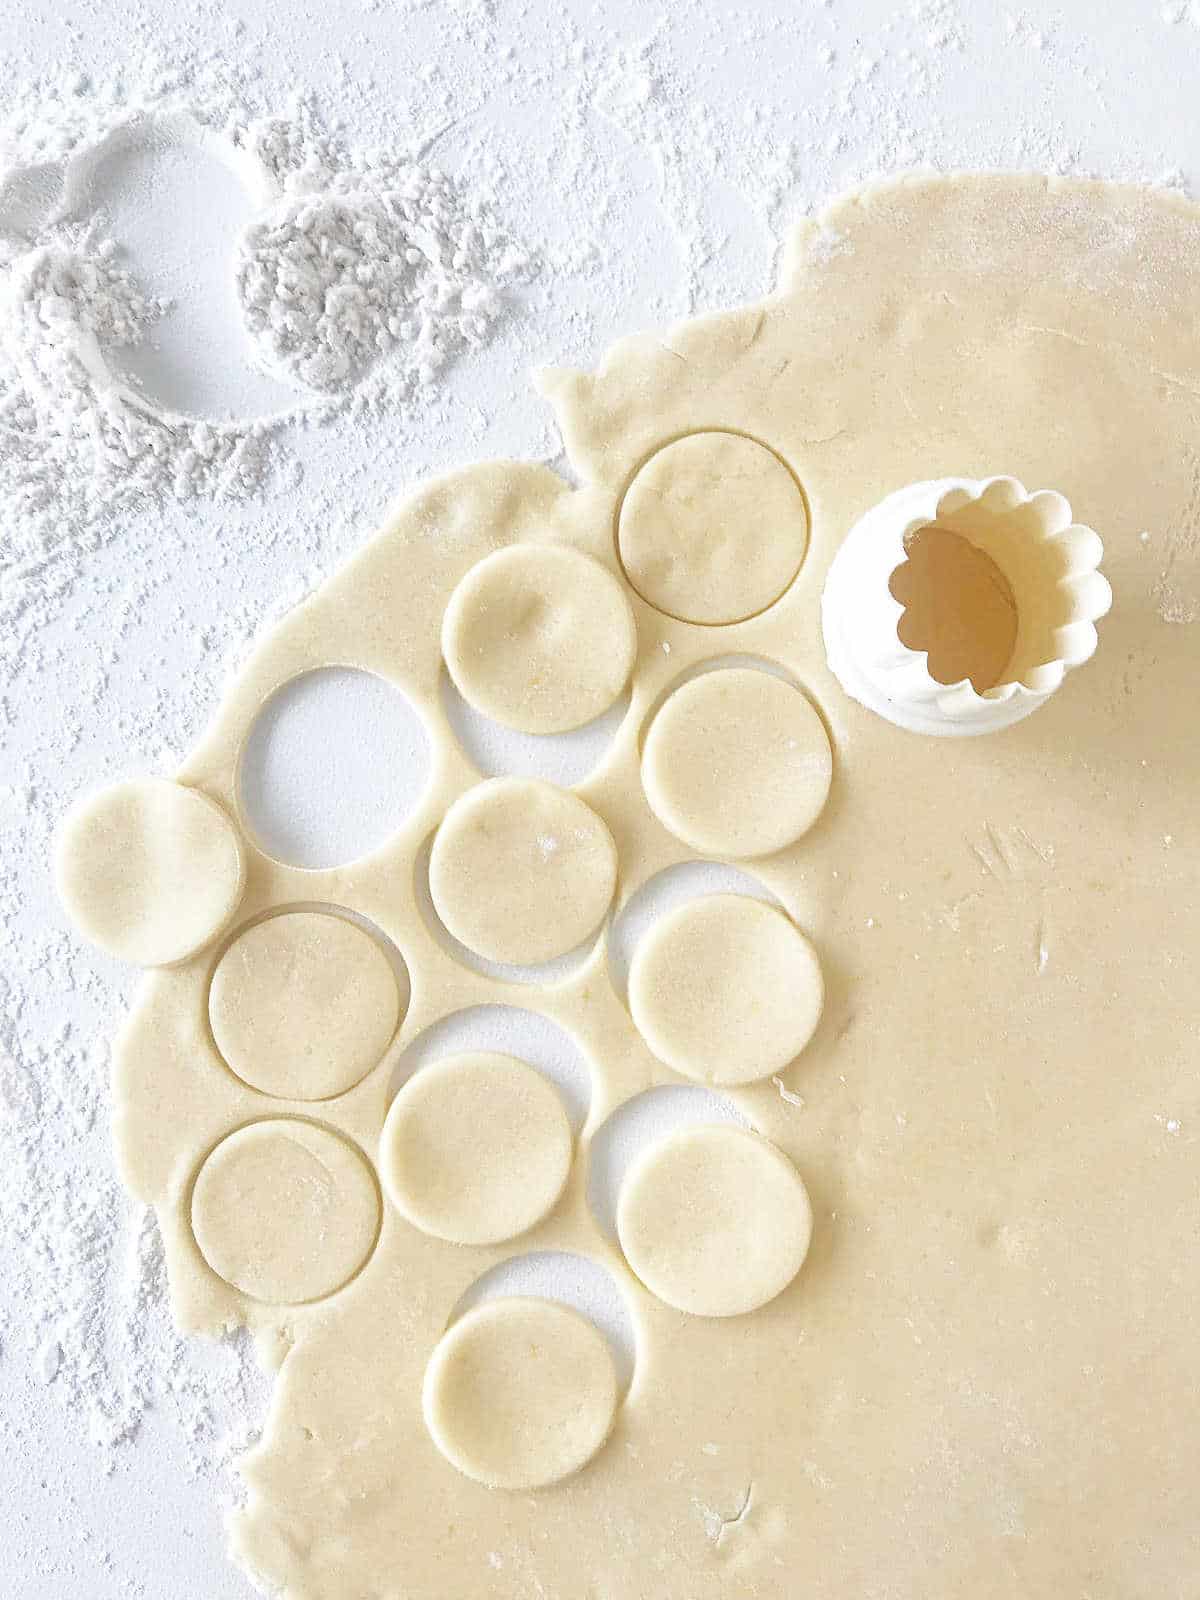 Rolled cookie dough on a floured white surface with round cutter and some cut circles of dough.